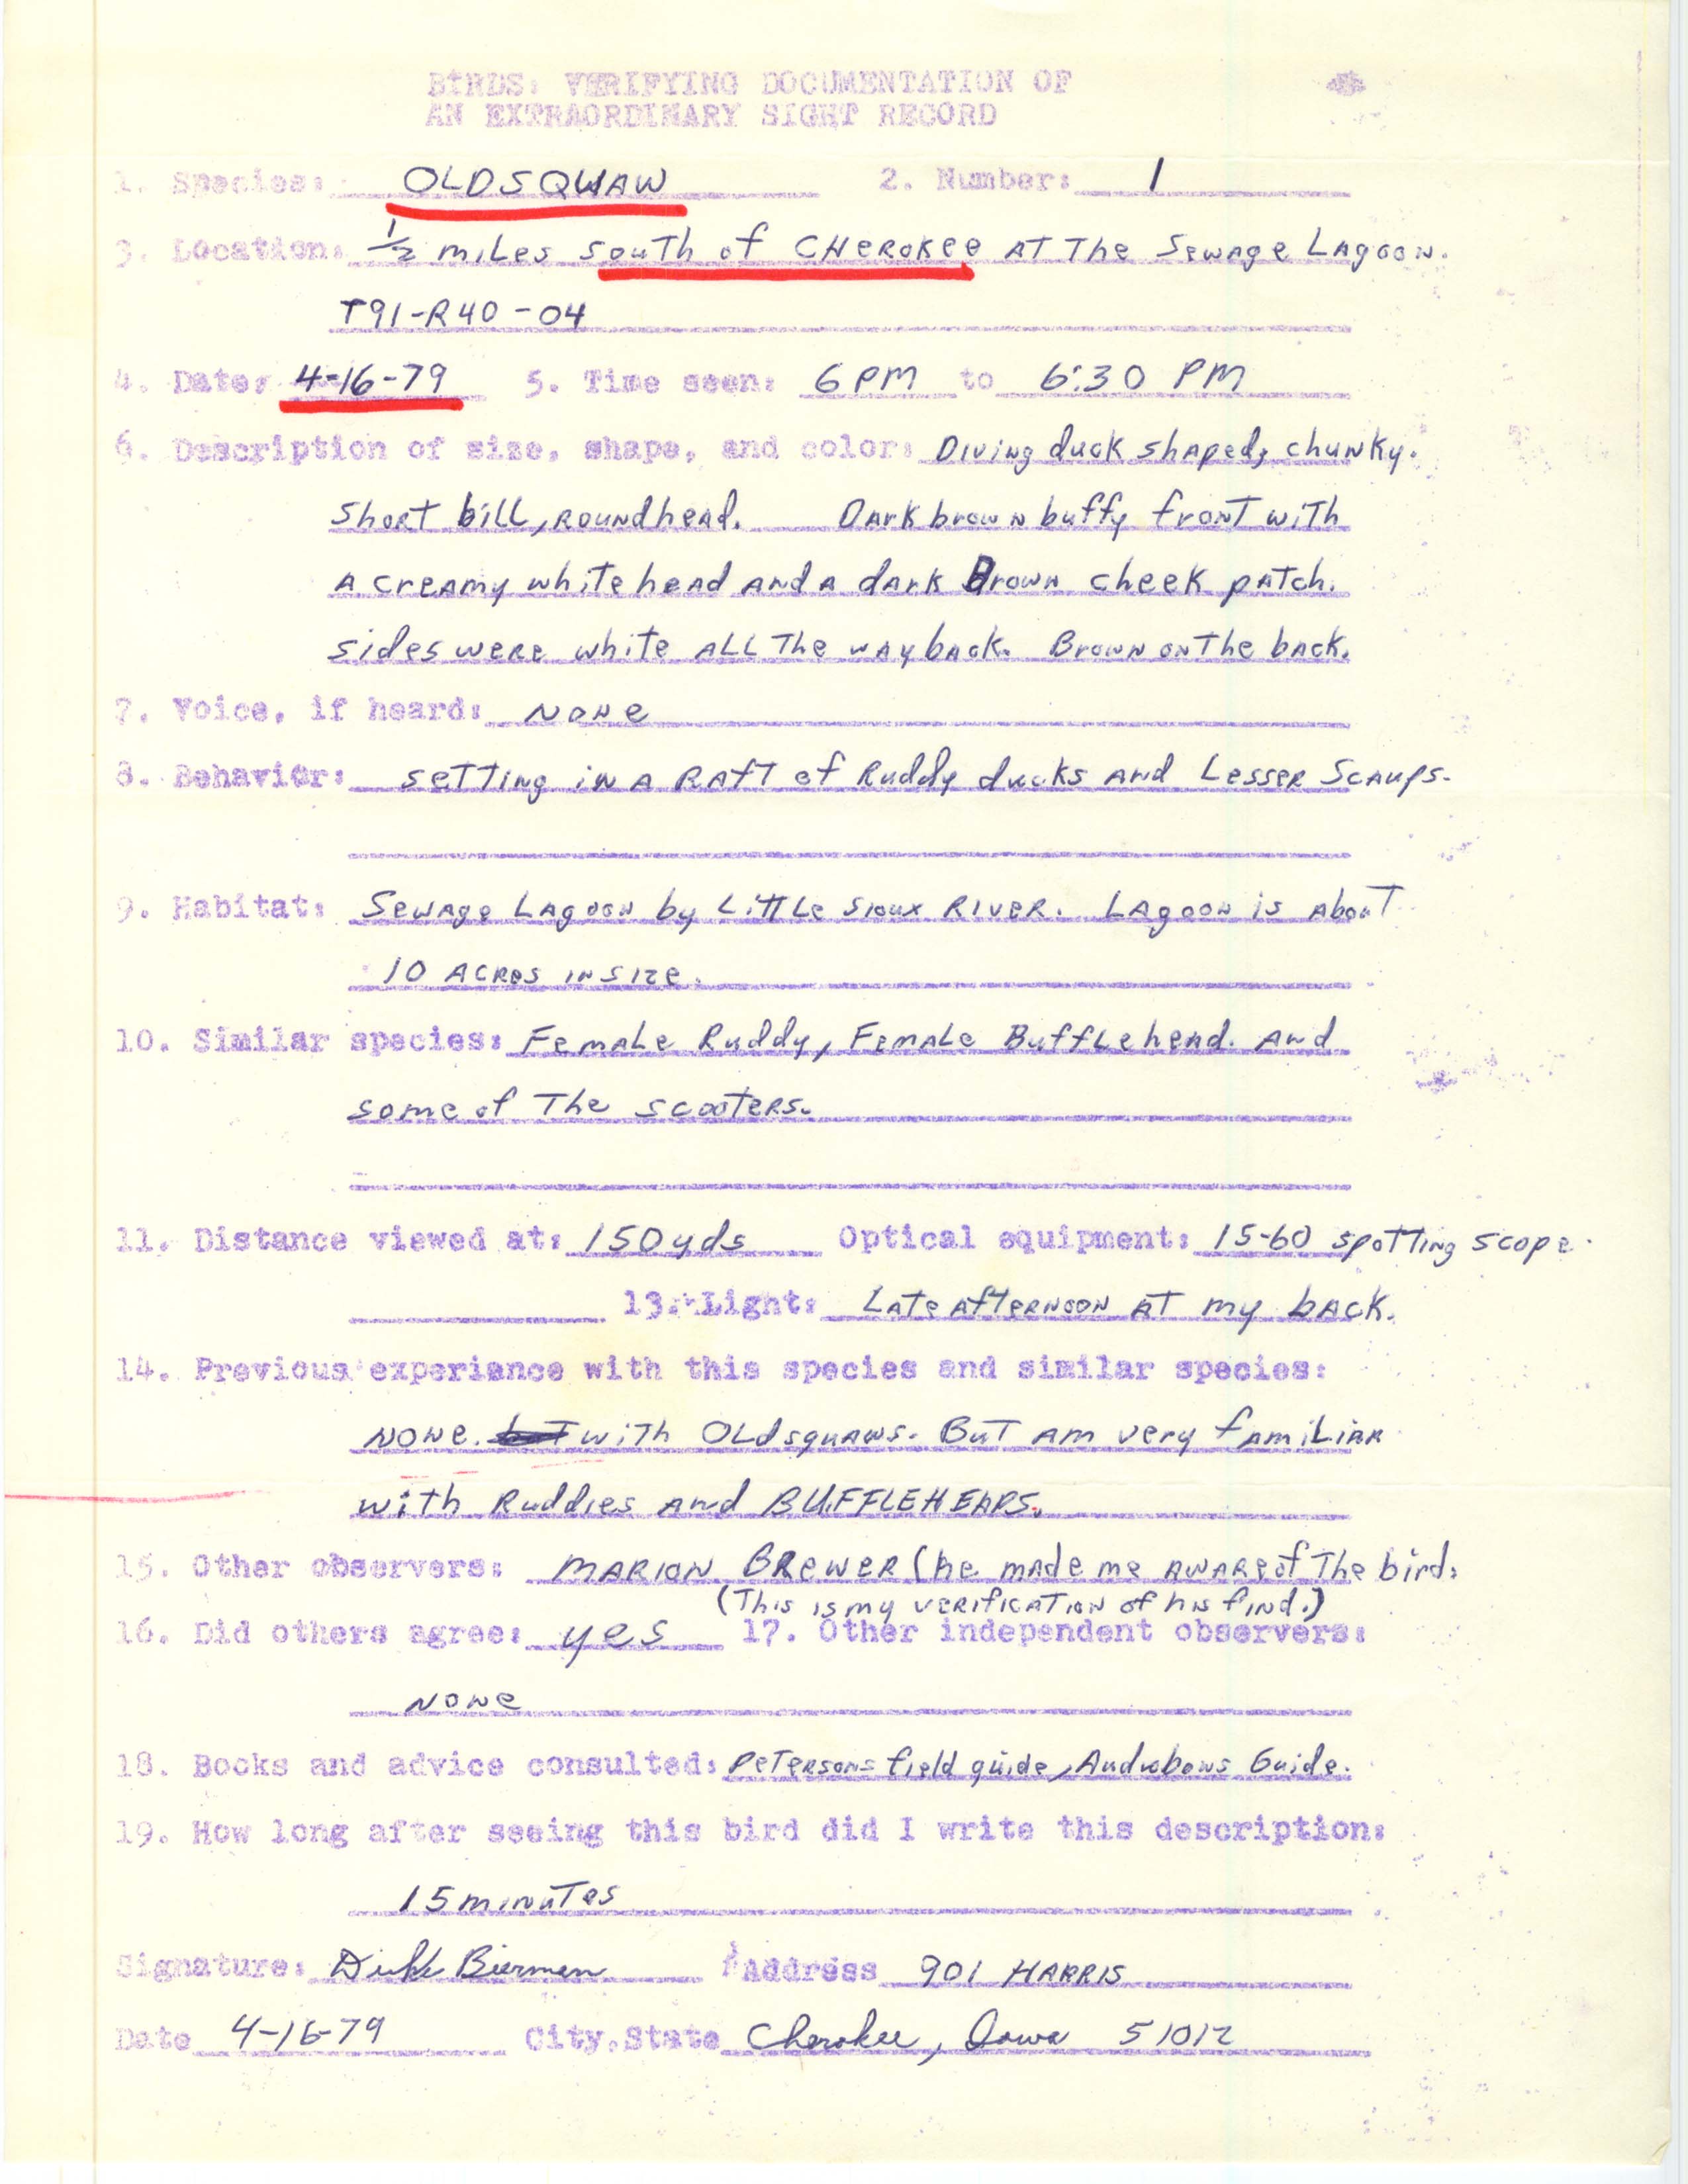 Rare bird documentation form for Long-tailed Duck at Cherokee, 1979